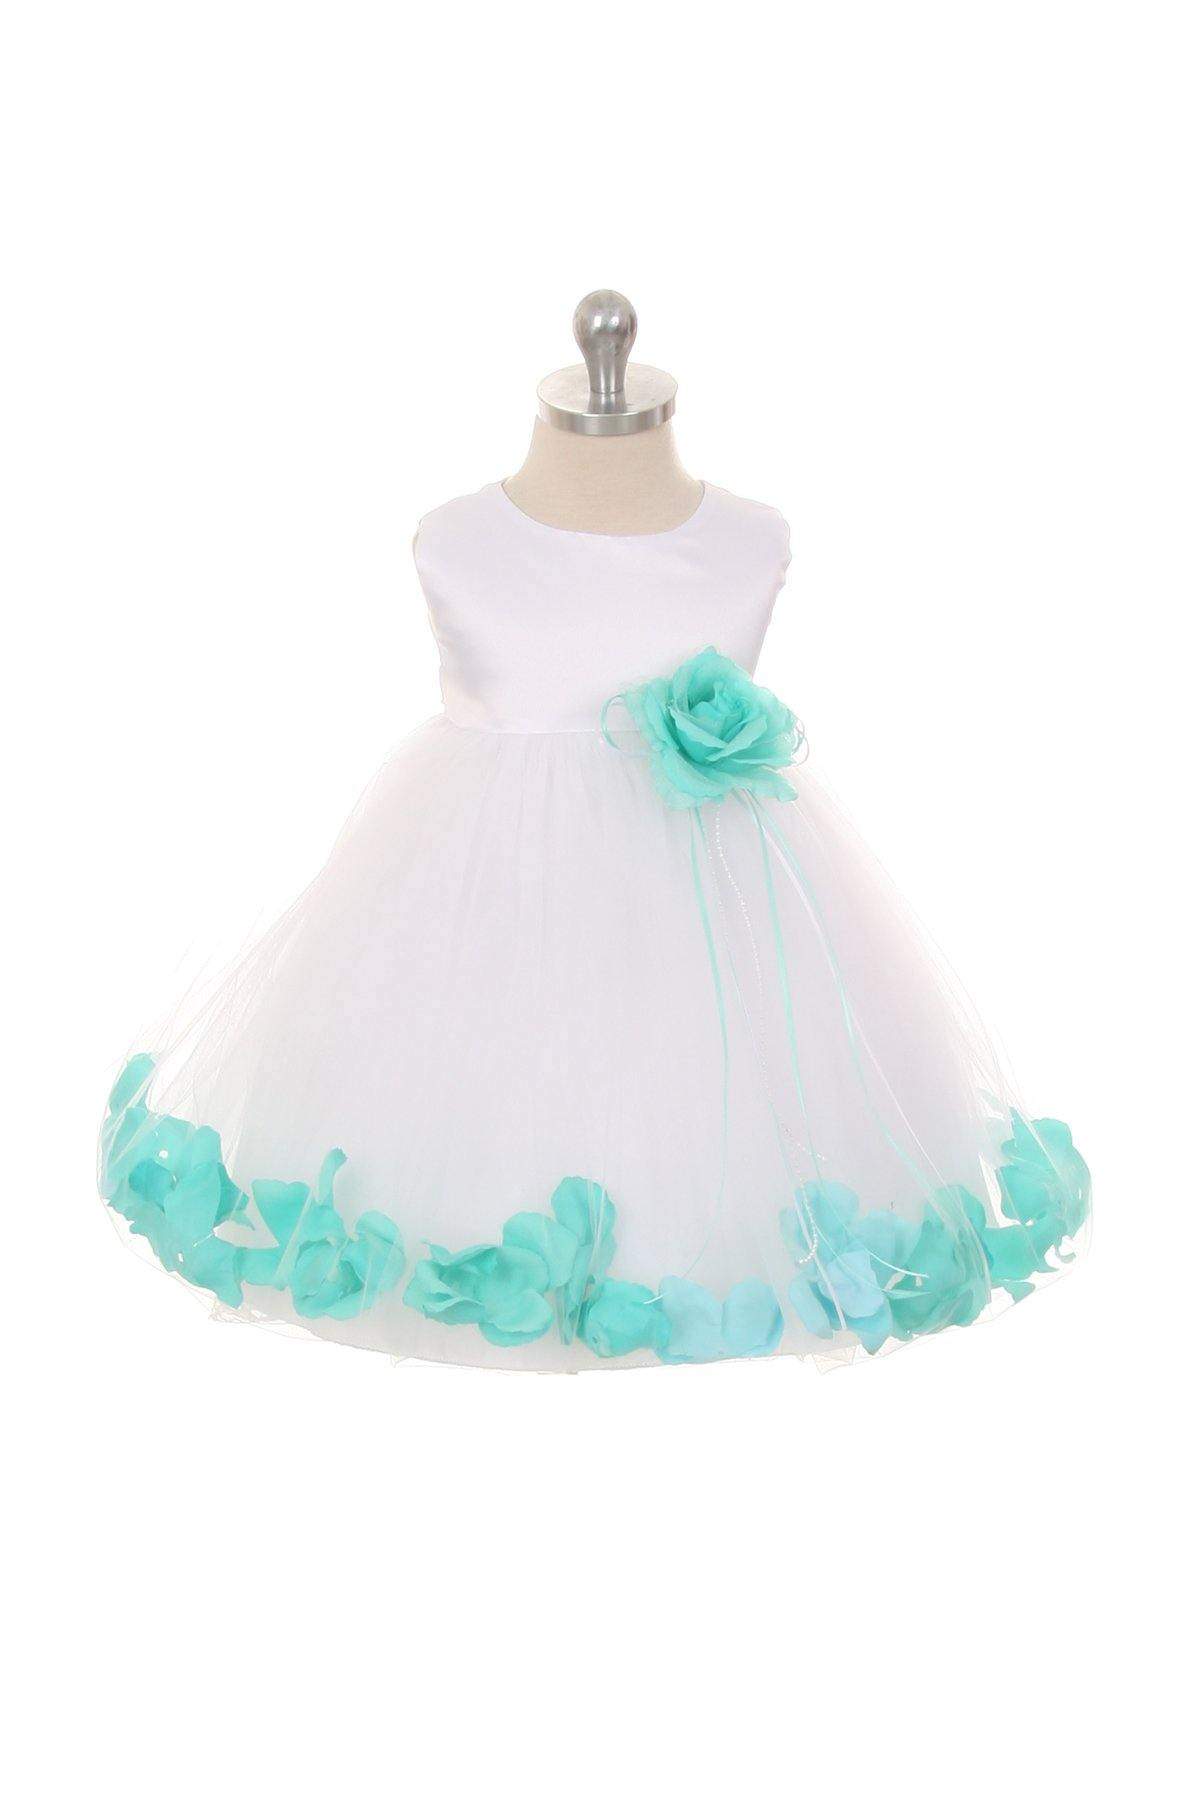 Satin Flower Petal Baby Dress (White Dress)-Kid's Dream-baby-dress,baby_girl,color_Dusty Rose,color_White,fabric_Satin,fabric_Tulle,meta-related-collection-shop-the-outfit-baby,size_L-18 Months,size_M-12 Months,size_S-6 Months,size_XL-24 Months